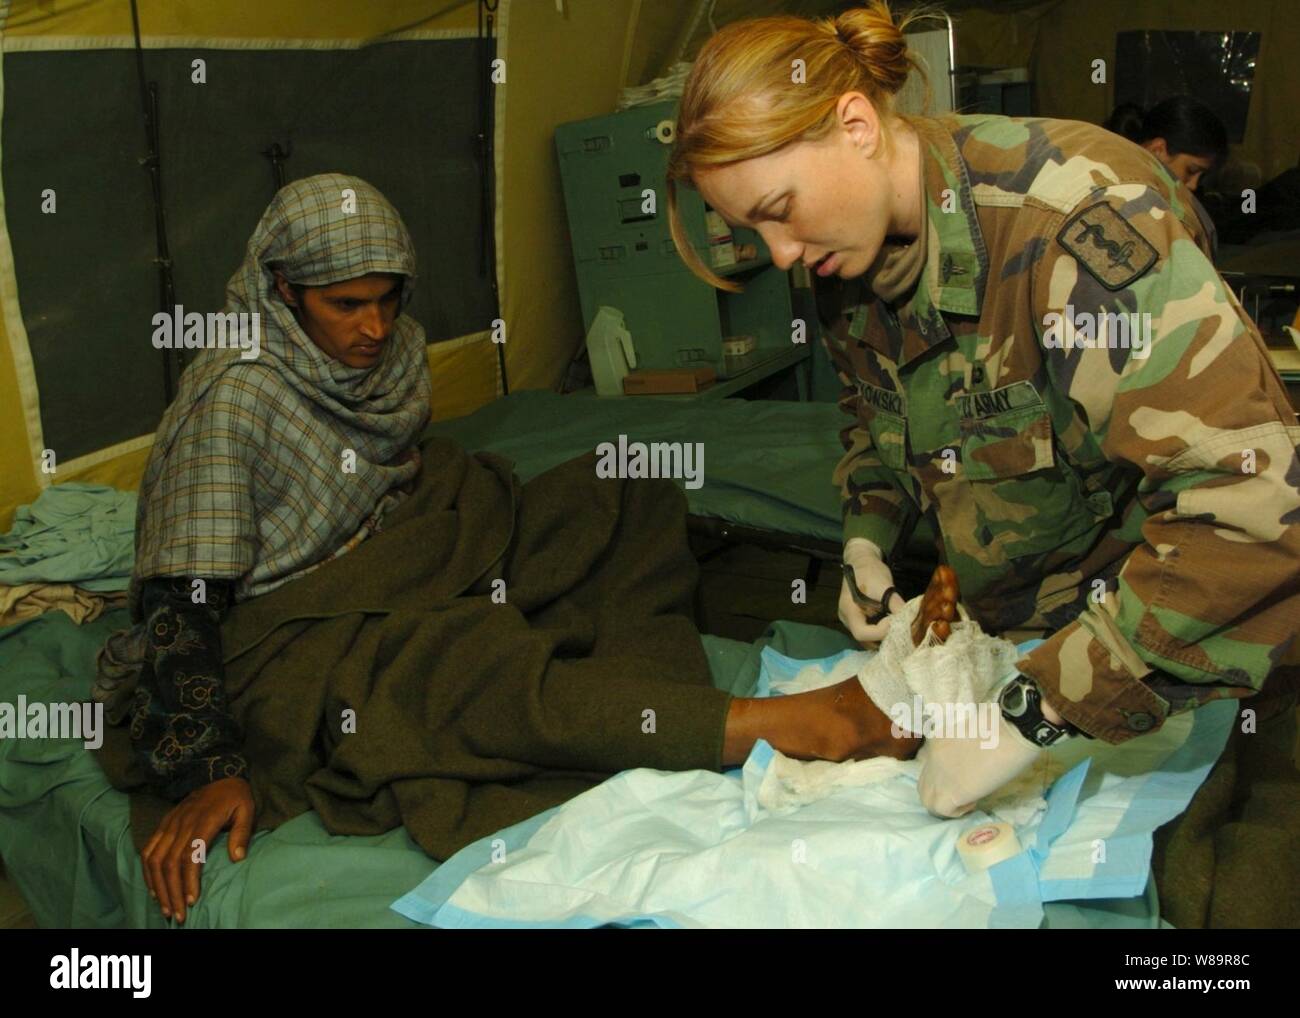 Army 2nd Lt. Miah Kwiatkowski removes gauze from a Pakistani woman's foot to check for swelling at the 212th Mobile Army Surgical Hospital in Muzaffarabad, Pakistan, on Nov. 1, 2005.  The Pakistani woman is a victim of the devastating earthquake that struck the region Oct. 8, 2005.  The Department of Defense is supporting the State Department by providing disaster relief supplies and services following the massive earthquake that struck Pakistan and parts of India and Afghanistan. Stock Photo